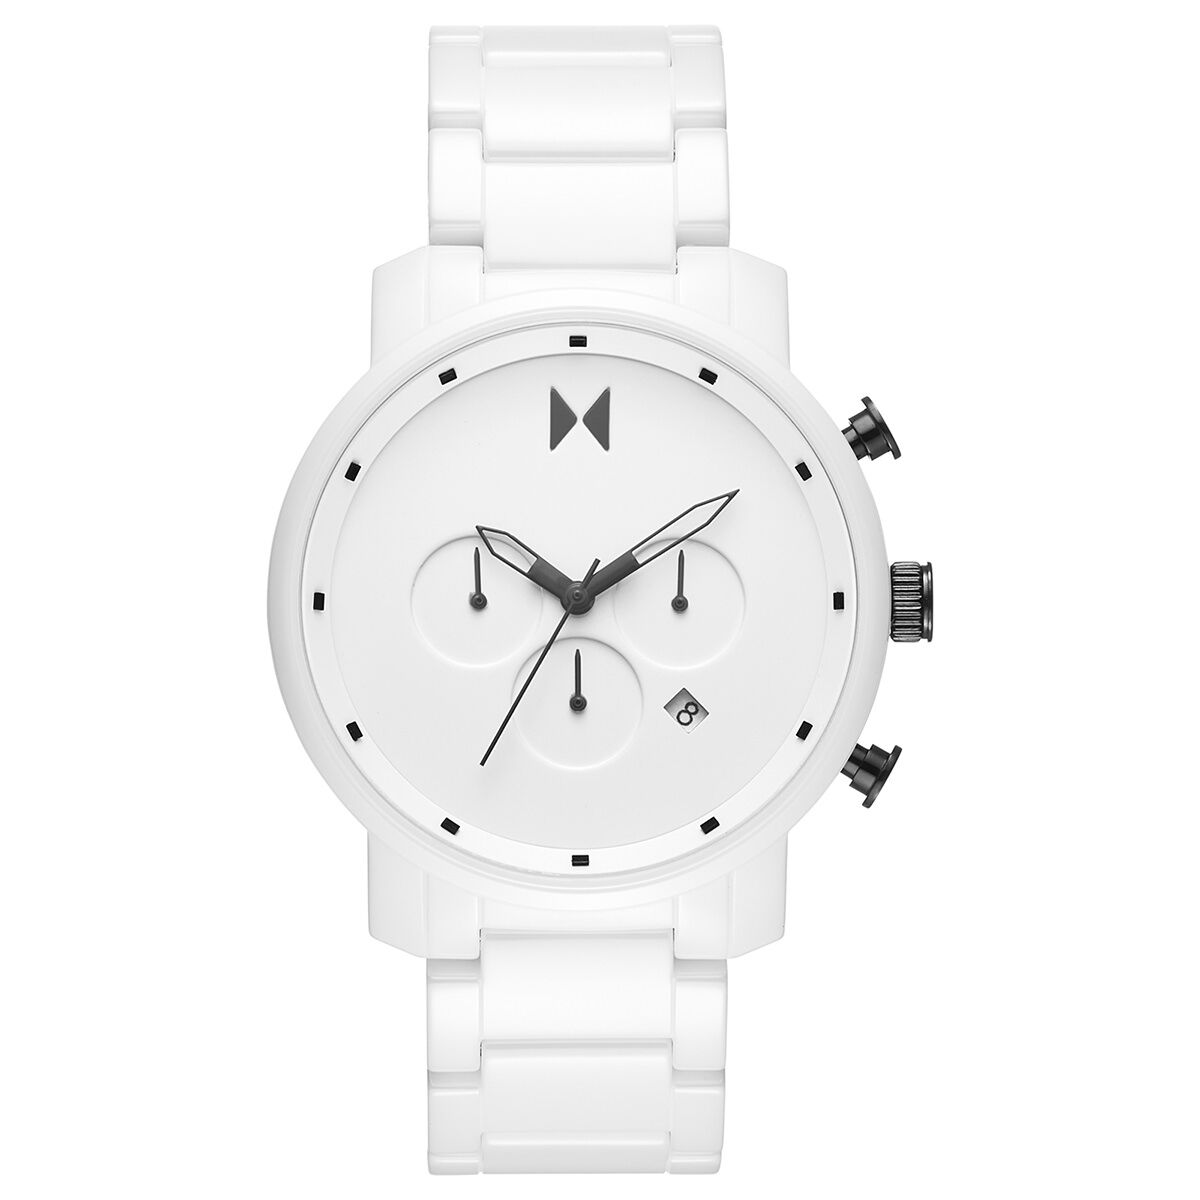 SOLD OUT Ceramic Chrono - 45MM Gloss White $248.00 Add to 